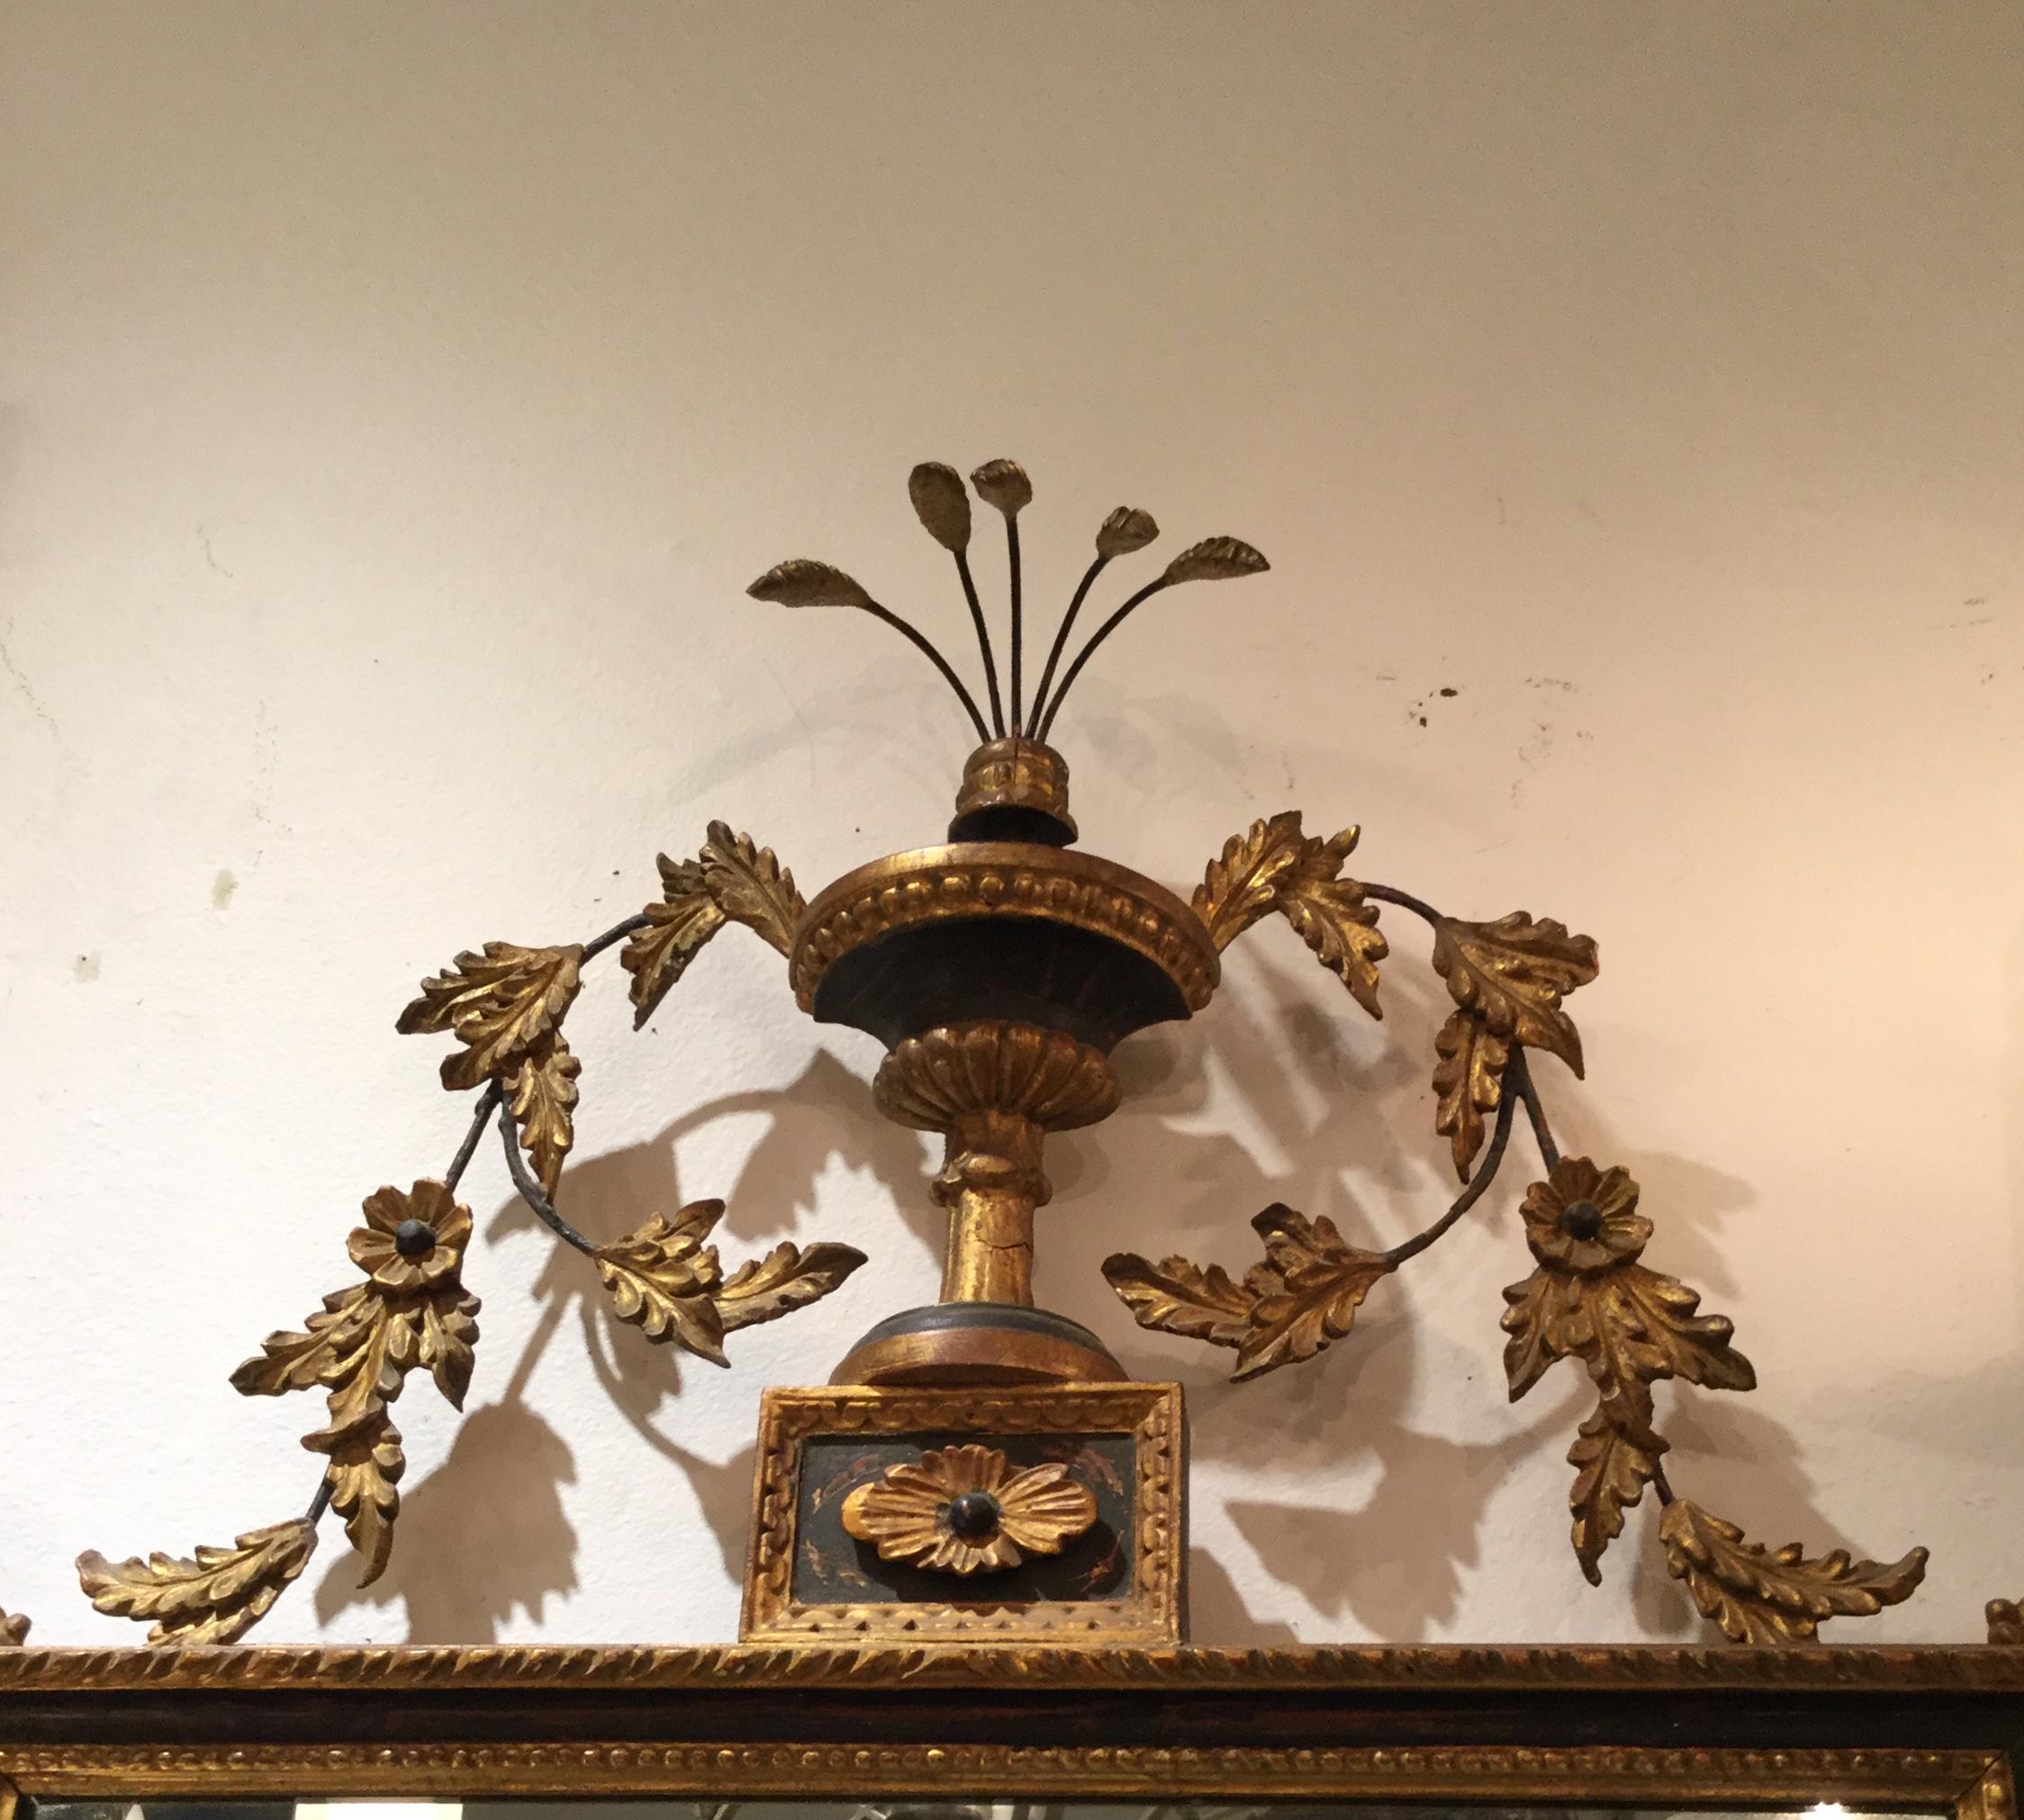 An elegant 19th century Italian neoclassical style carved wood mirror.
Nice gilded leaves and flowers that have been attached to metal adorn the mirror all the way around with larger carvings top and bottom and a crown of wheat at the top. The